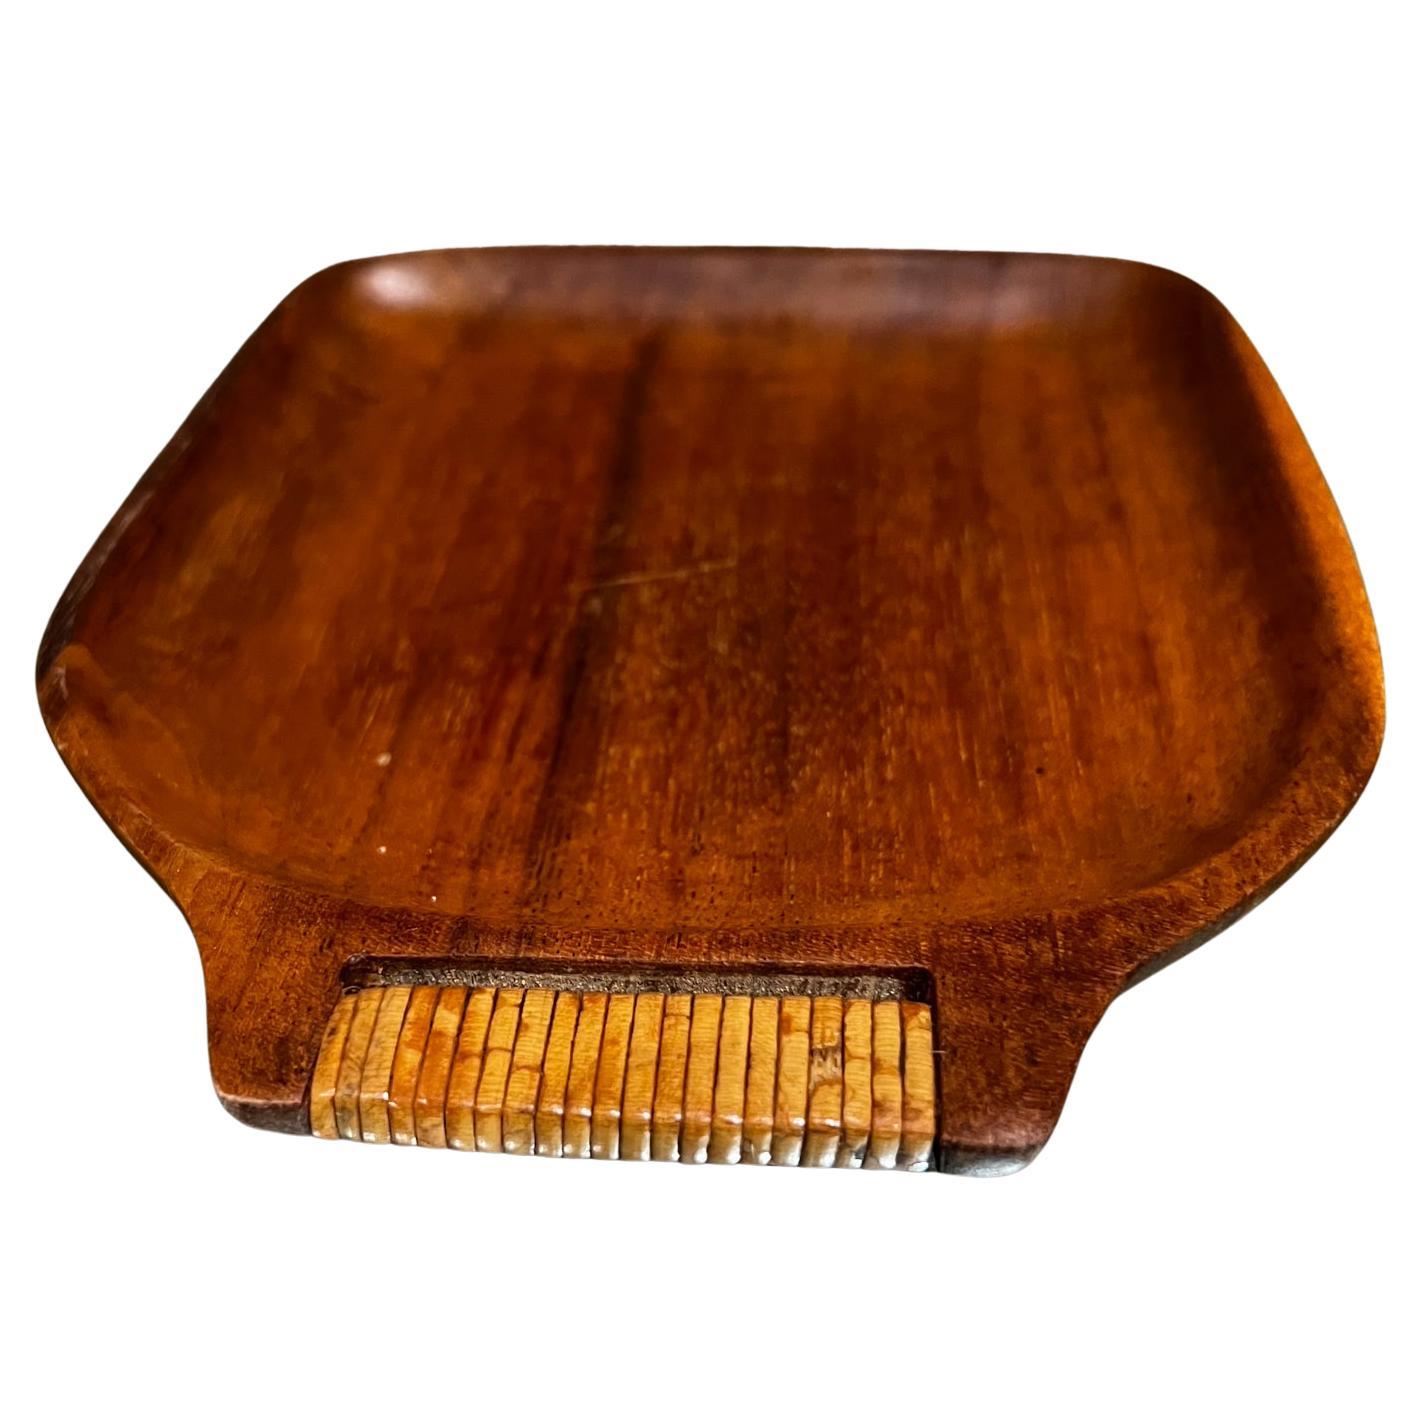 1960s Stylish Modern Teakwood Serving Tray with Cane Wrapped Handle For Sale